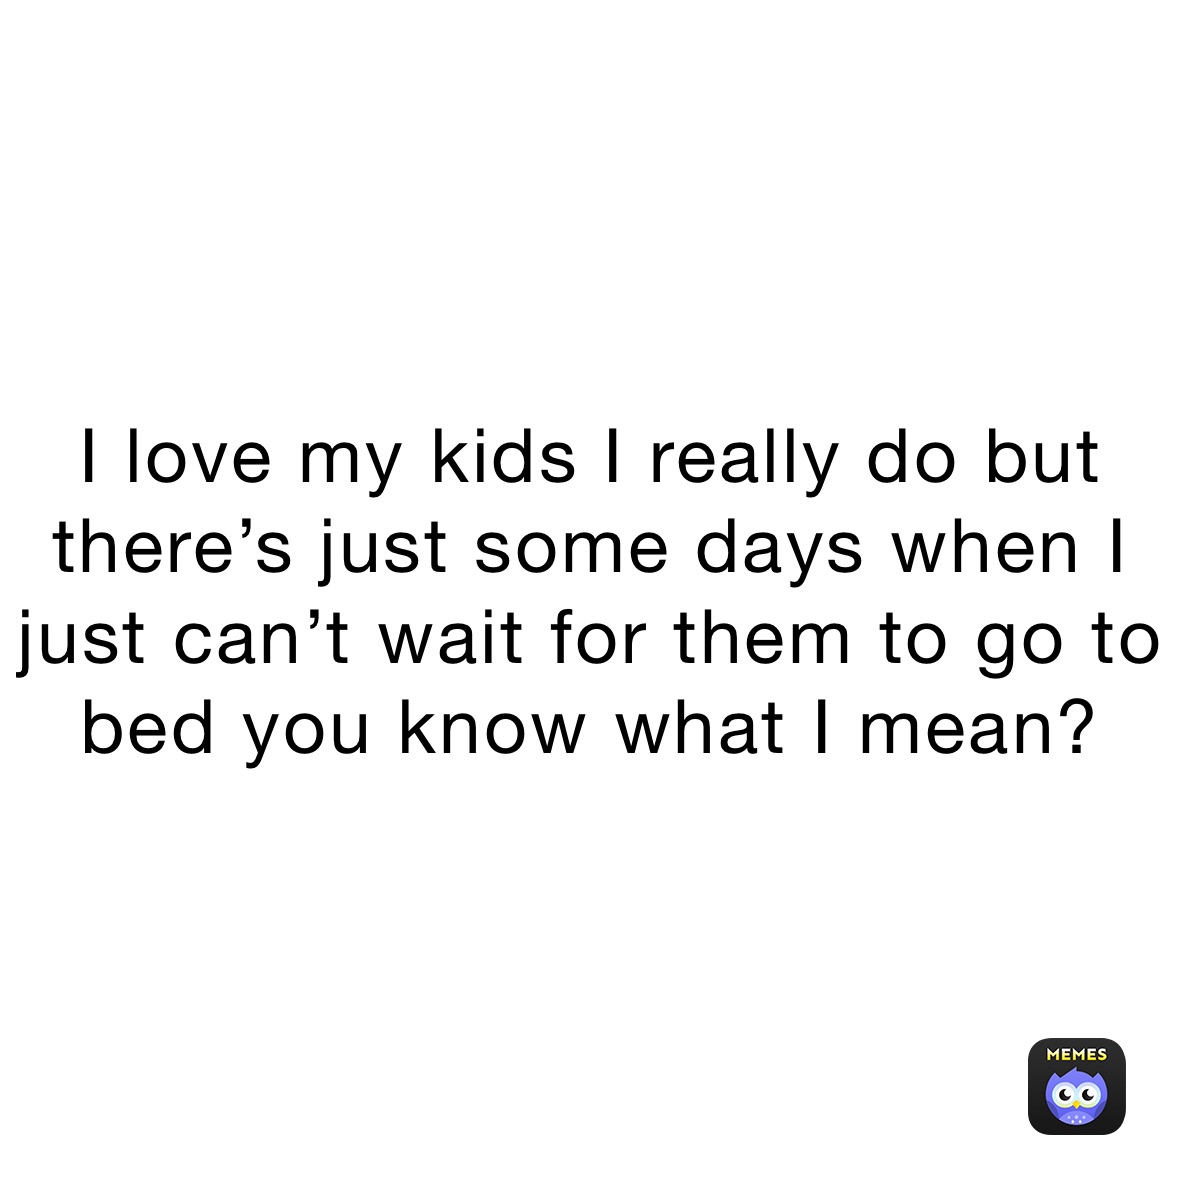 I love my kids I really do but there’s just some days when I just can’t wait for them to go to bed you know what I mean? 